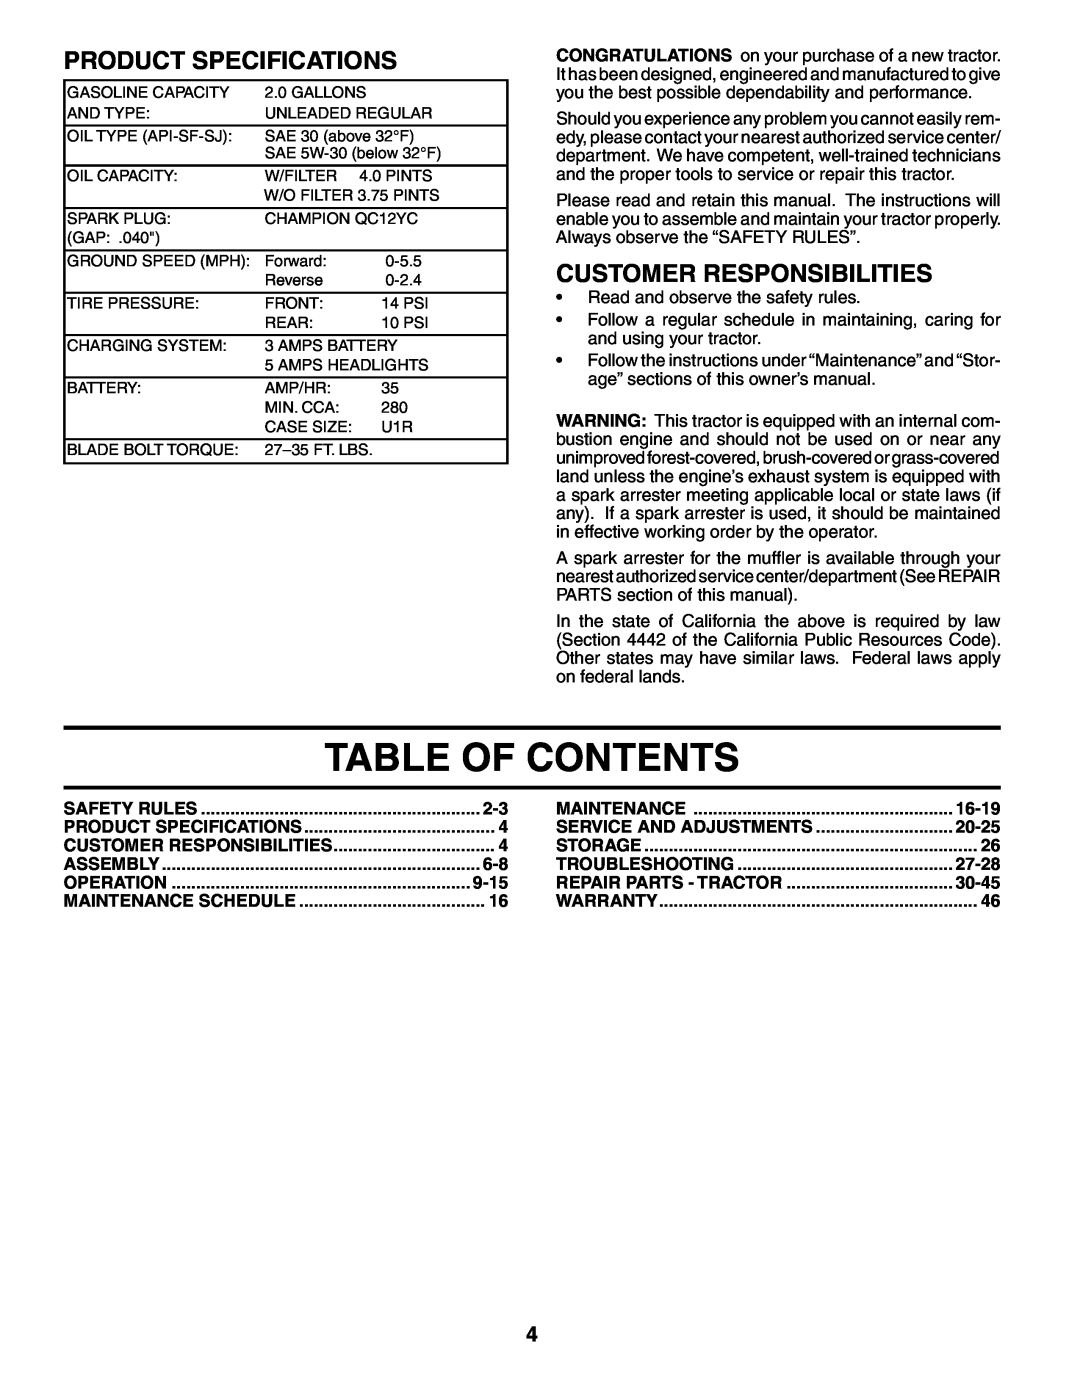 Poulan 184617 owner manual Table Of Contents, Product Specifications, Customer Responsibilities 